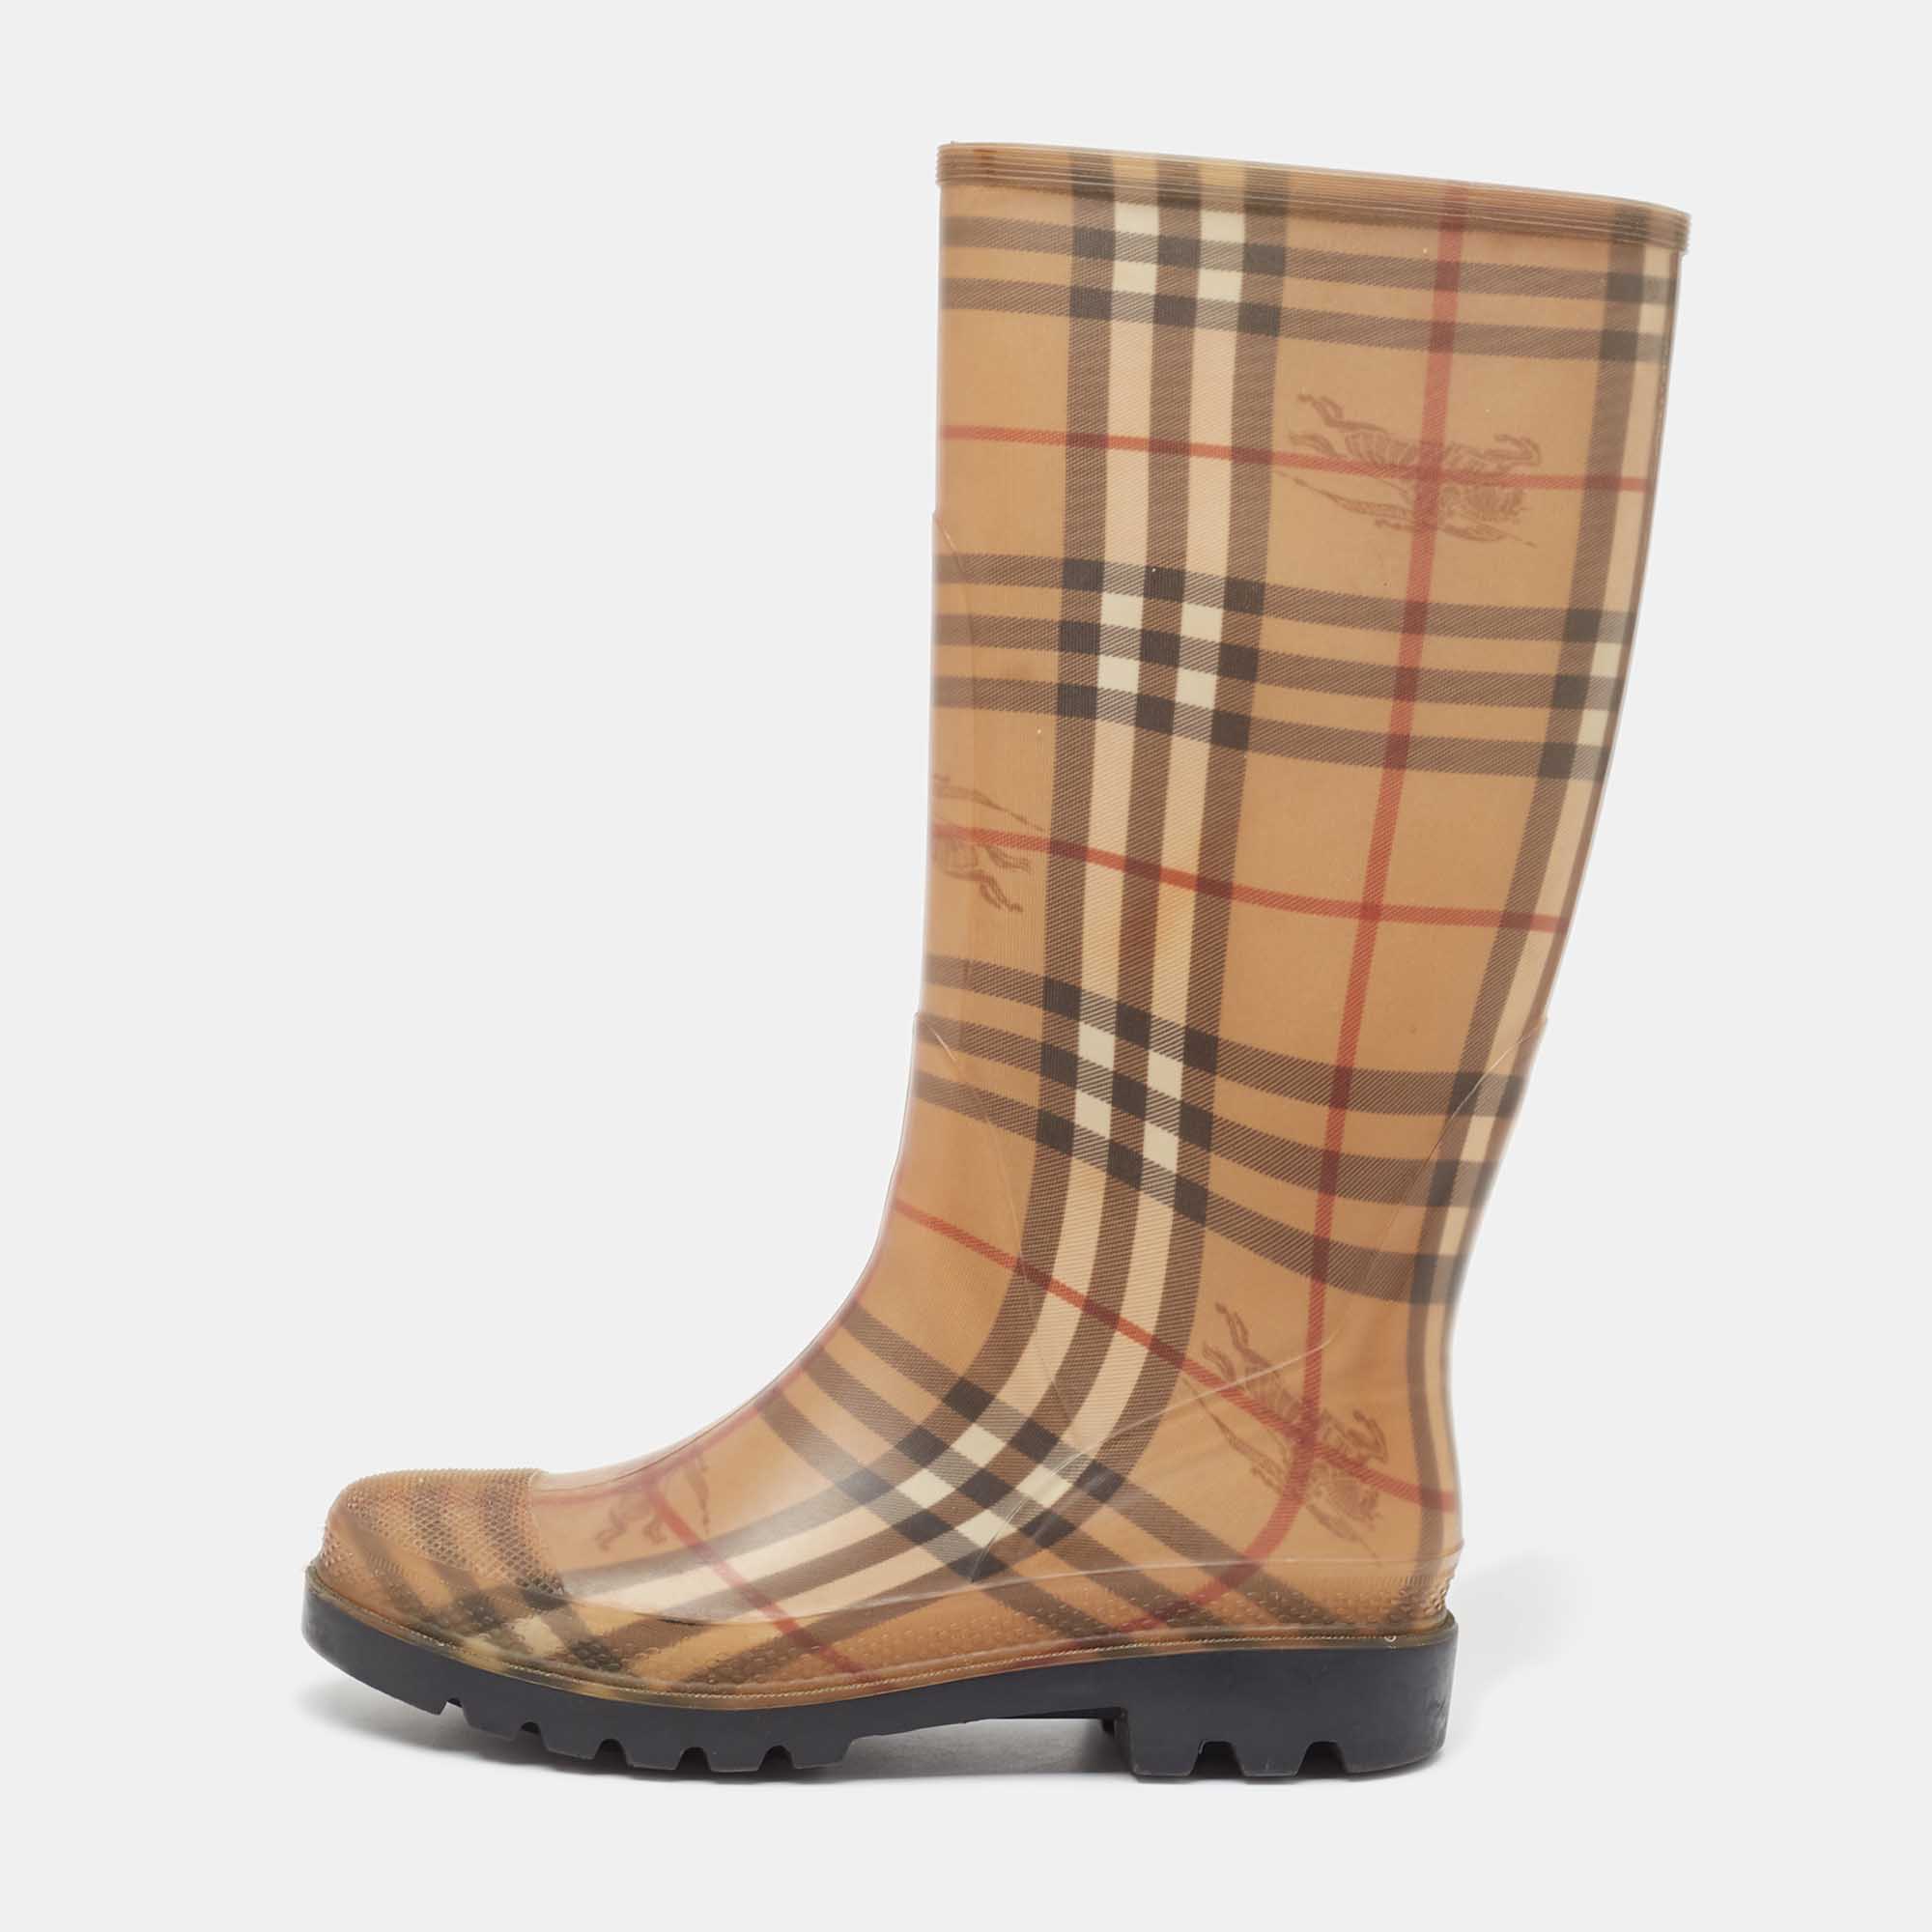 Burberry beige house check rubber rain boots size 40